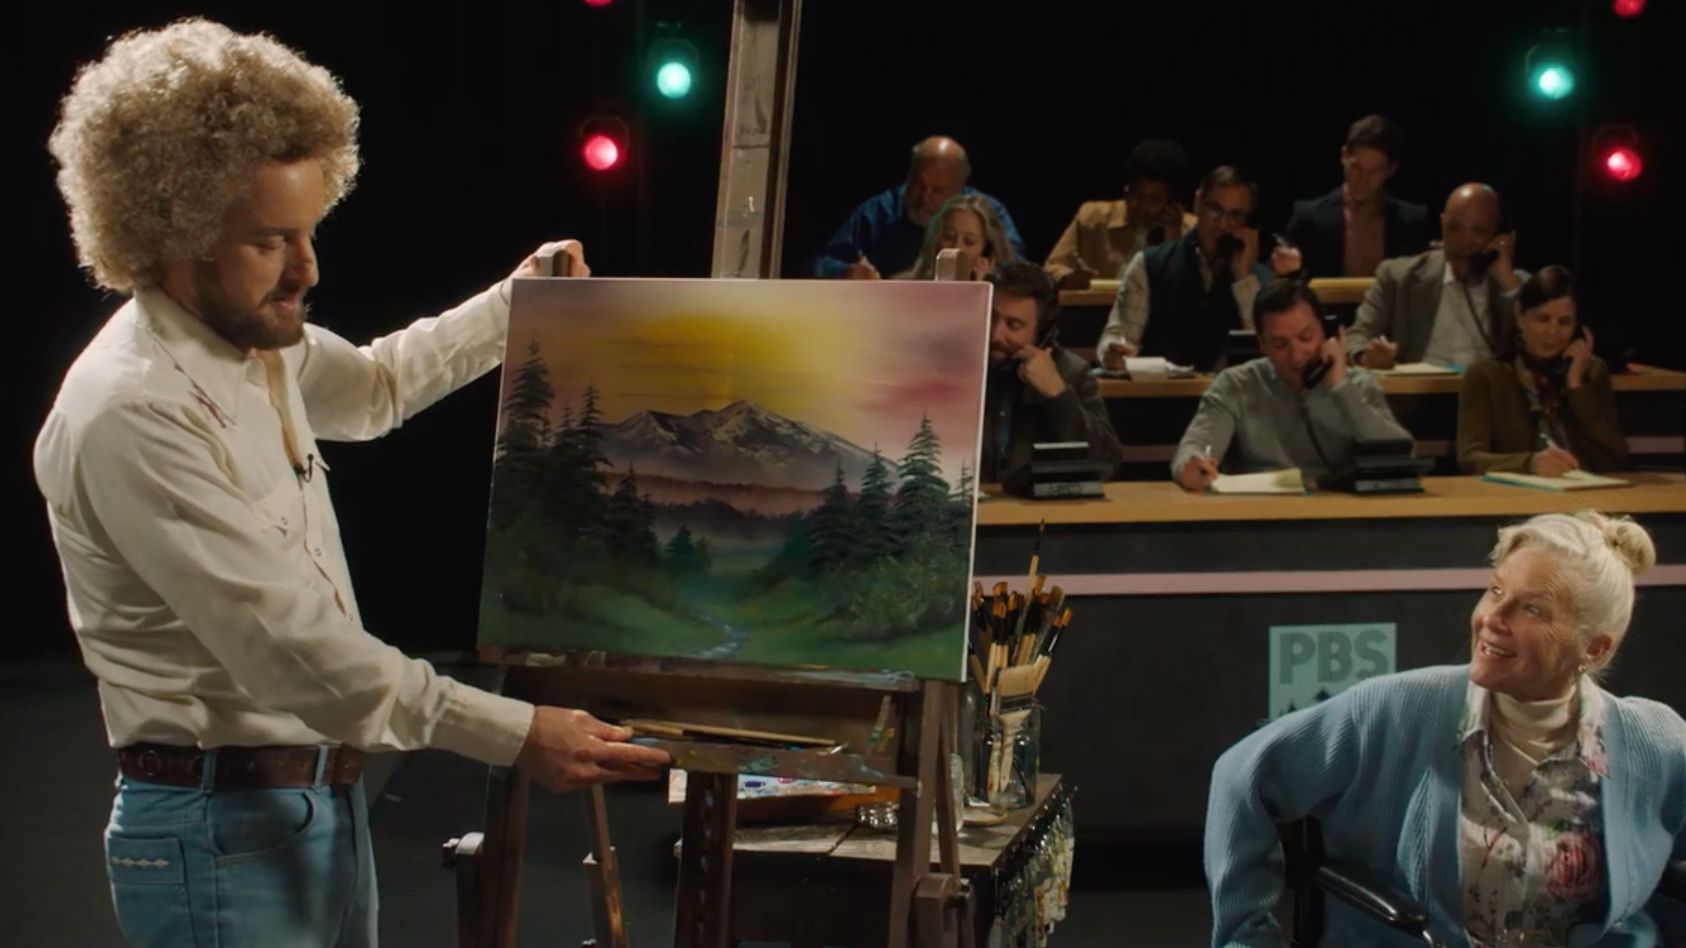 Paint' review: Owen Wilson plays a Bob Ross-type artist, in what